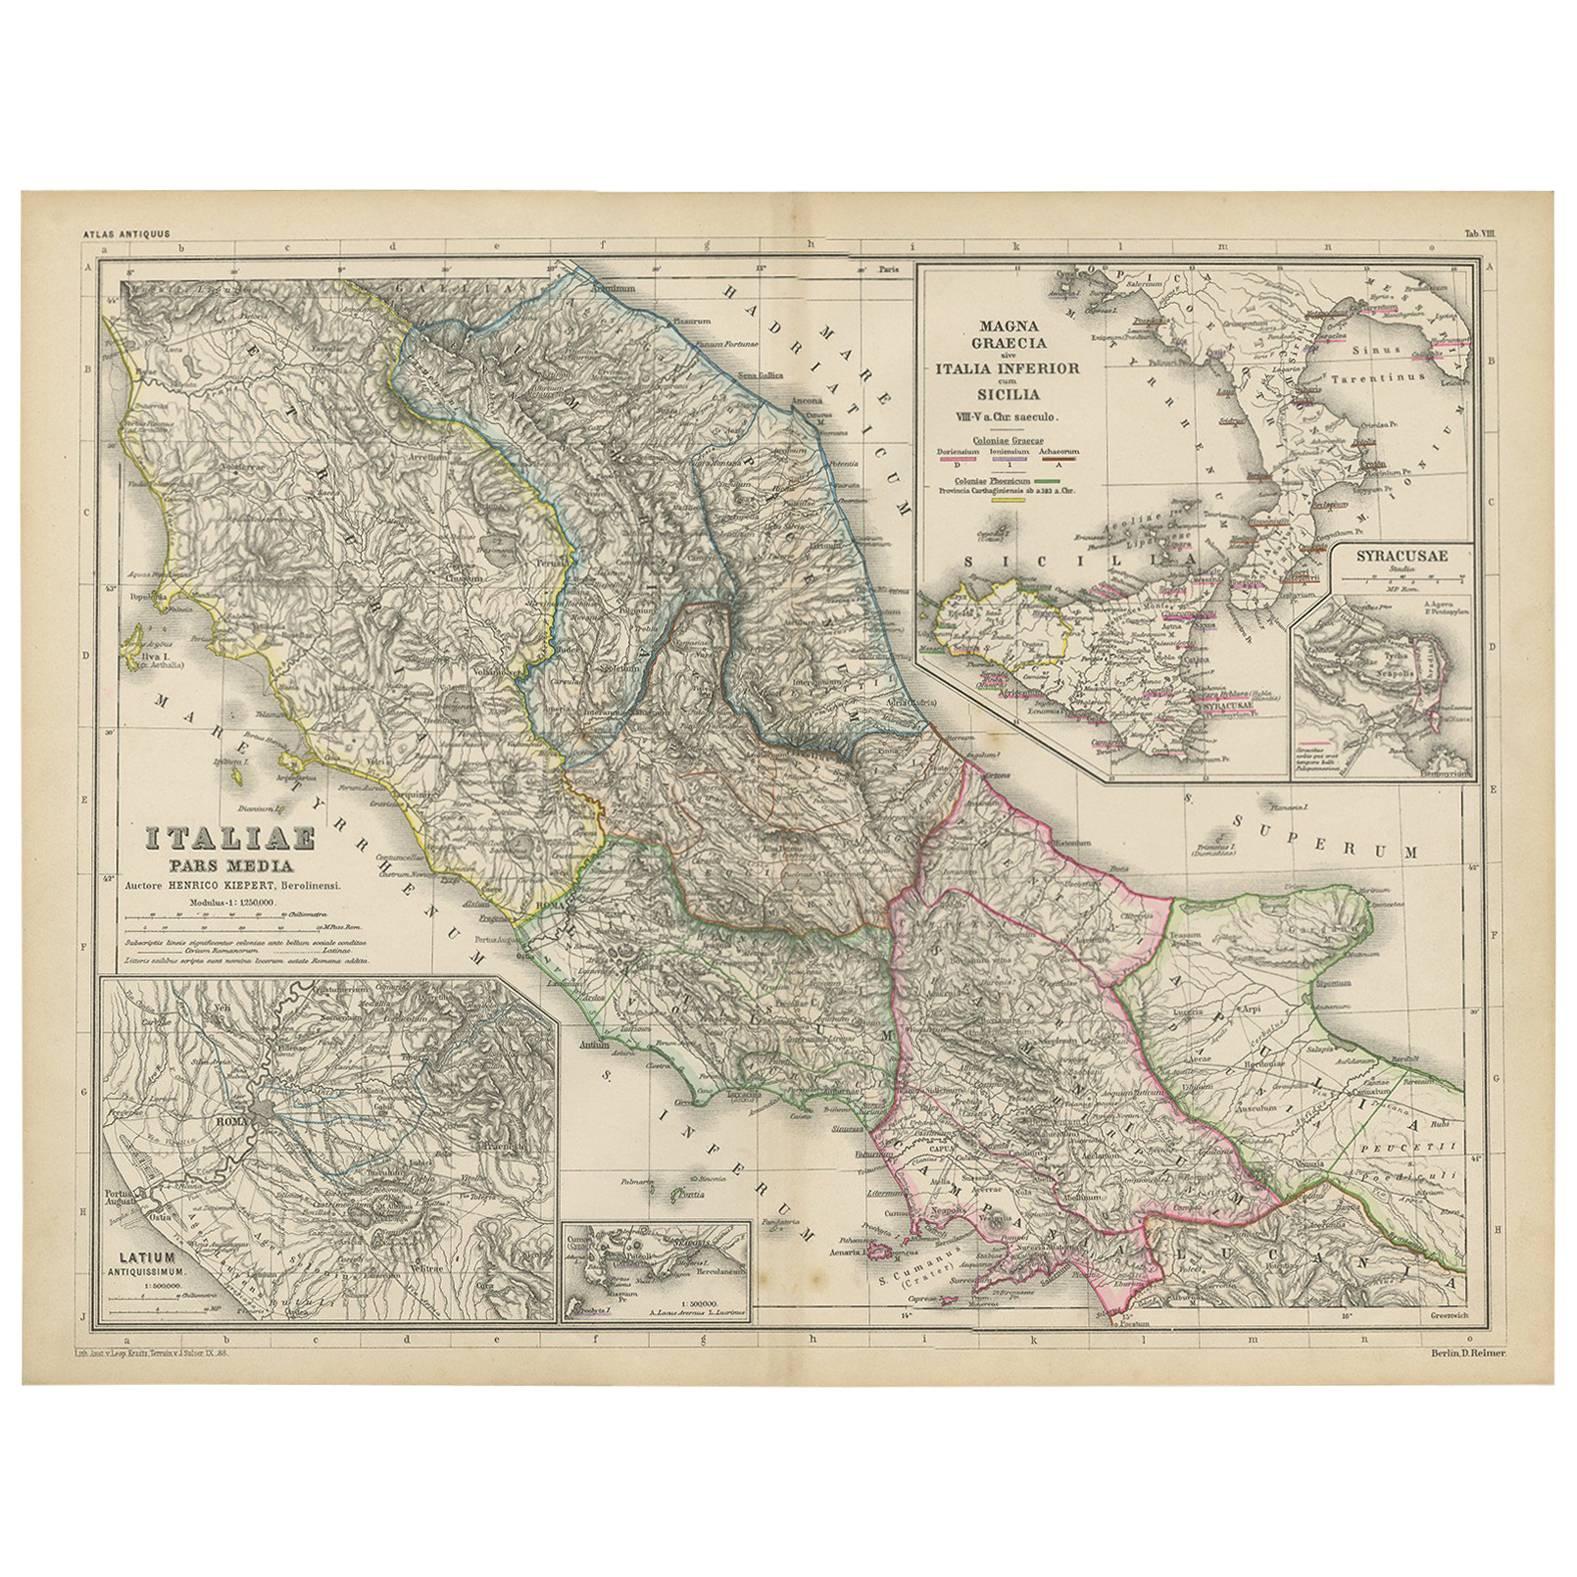 Antique Map of Italy and Greece by H. Kiepert, circa 1870